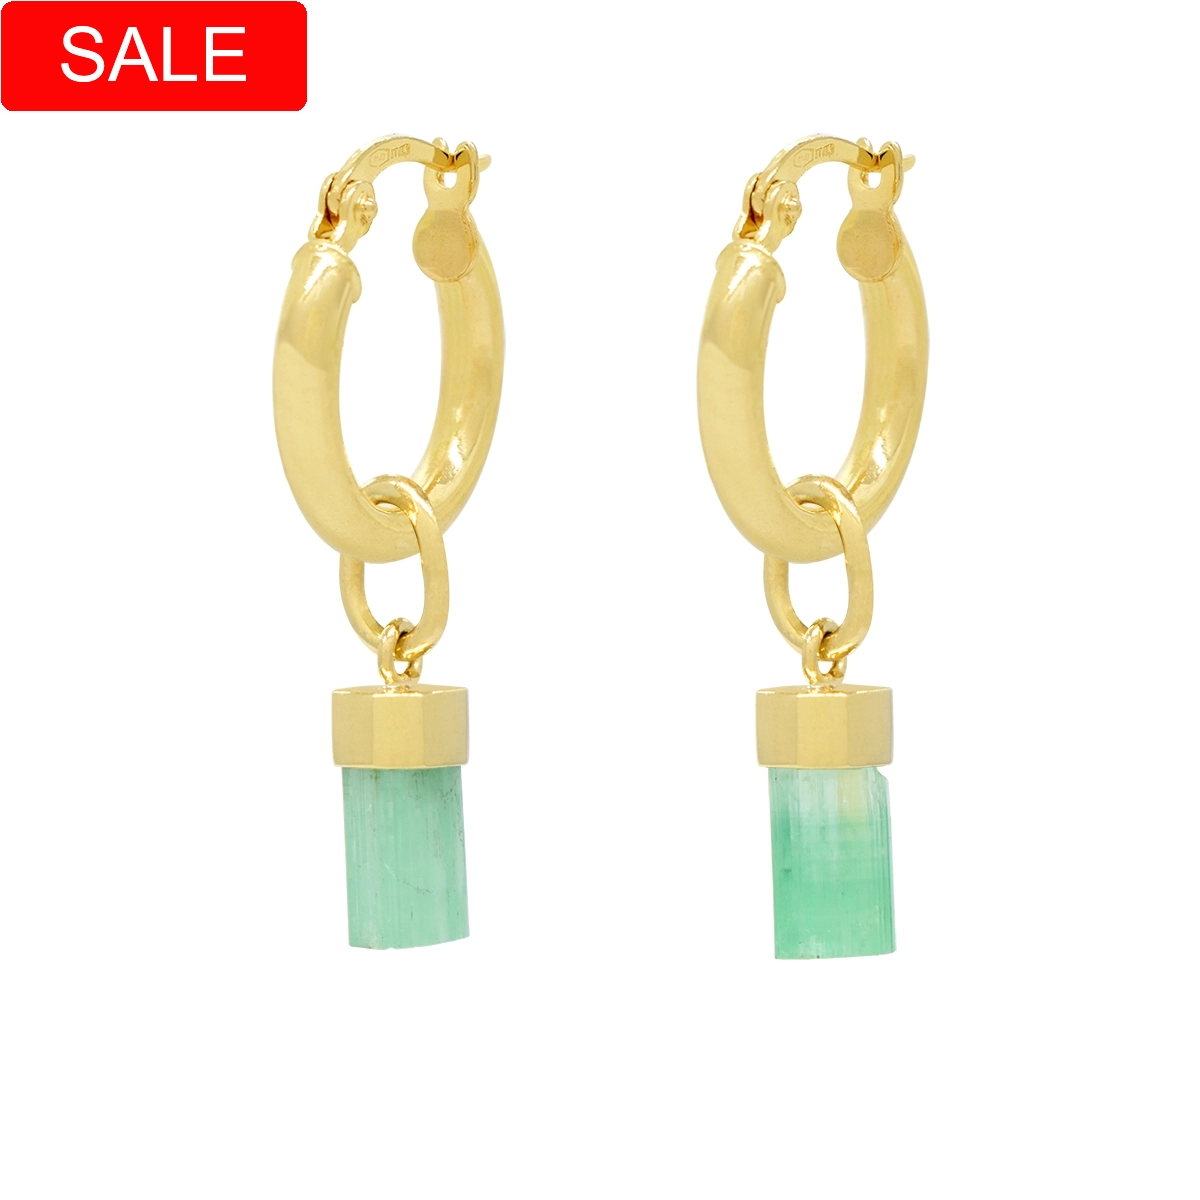 18K yellow gold hoop earrings with 2 uncut real emeralds in 3.80 Ct. t.w. set in large ring links that drop from the hoops